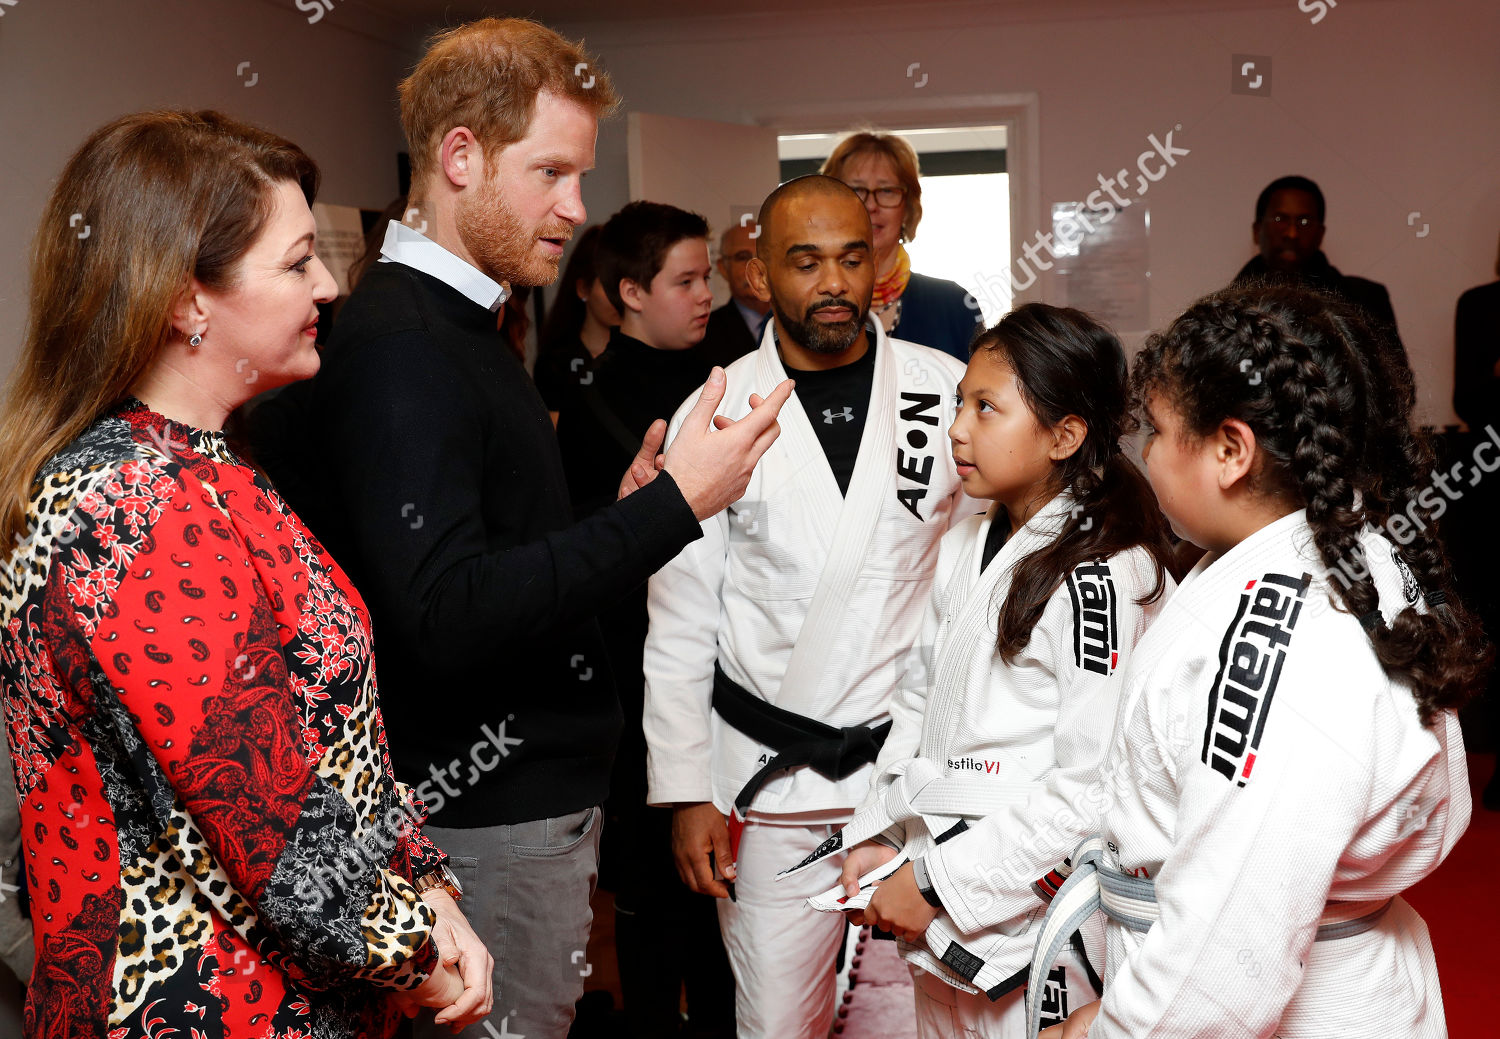 prince-harry-visit-to-fit-and-fed-half-term-initiative-streatham-london-uk-shutterstock-editorial-10110713l.jpg